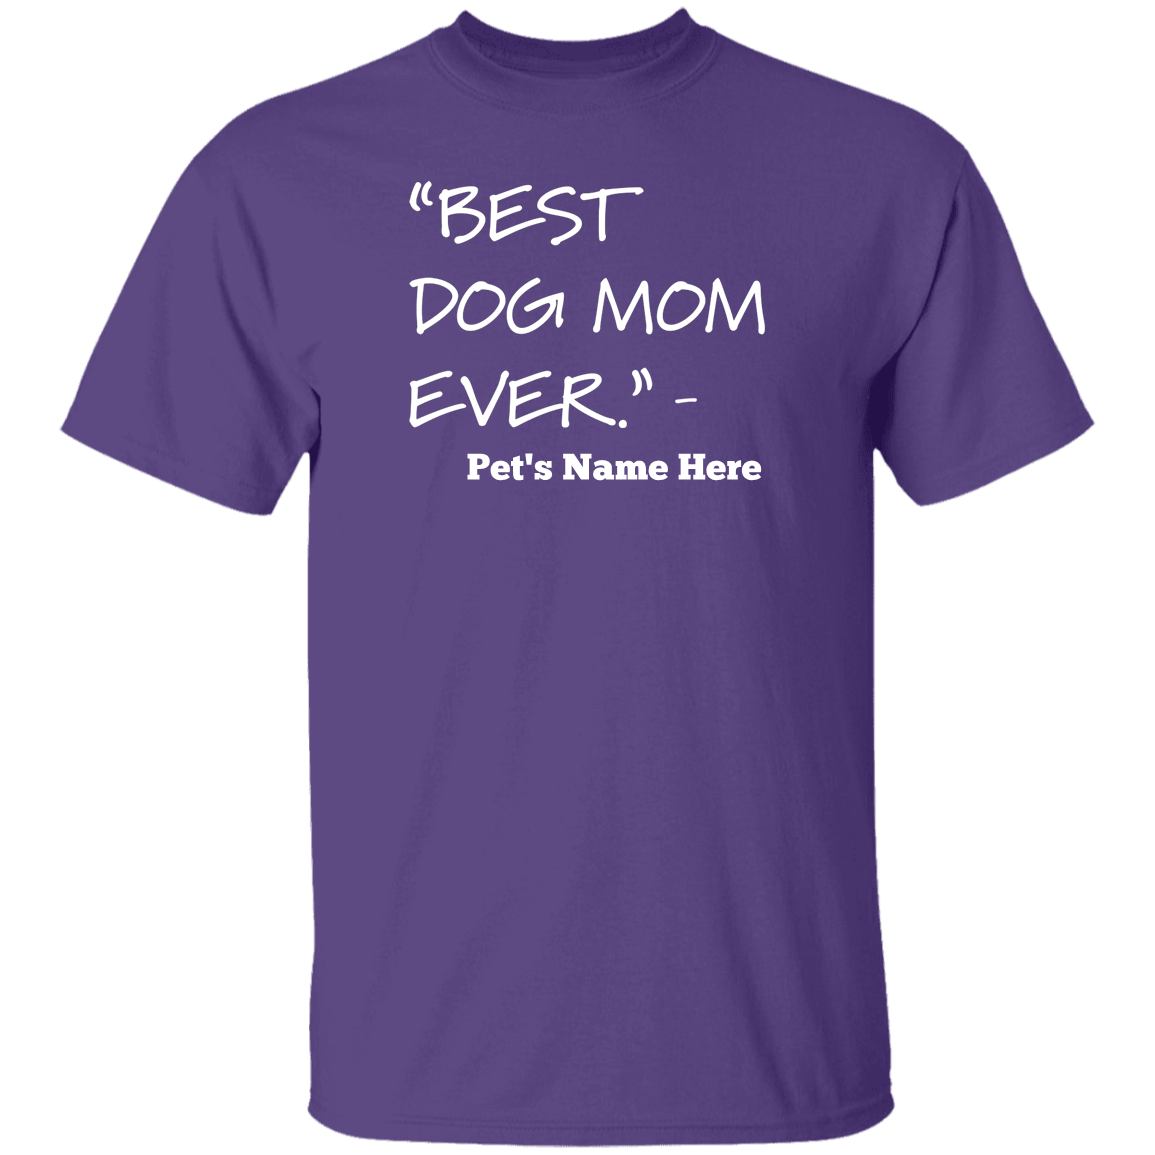 Personalized Best Dog Mom Ever - T Shirt.